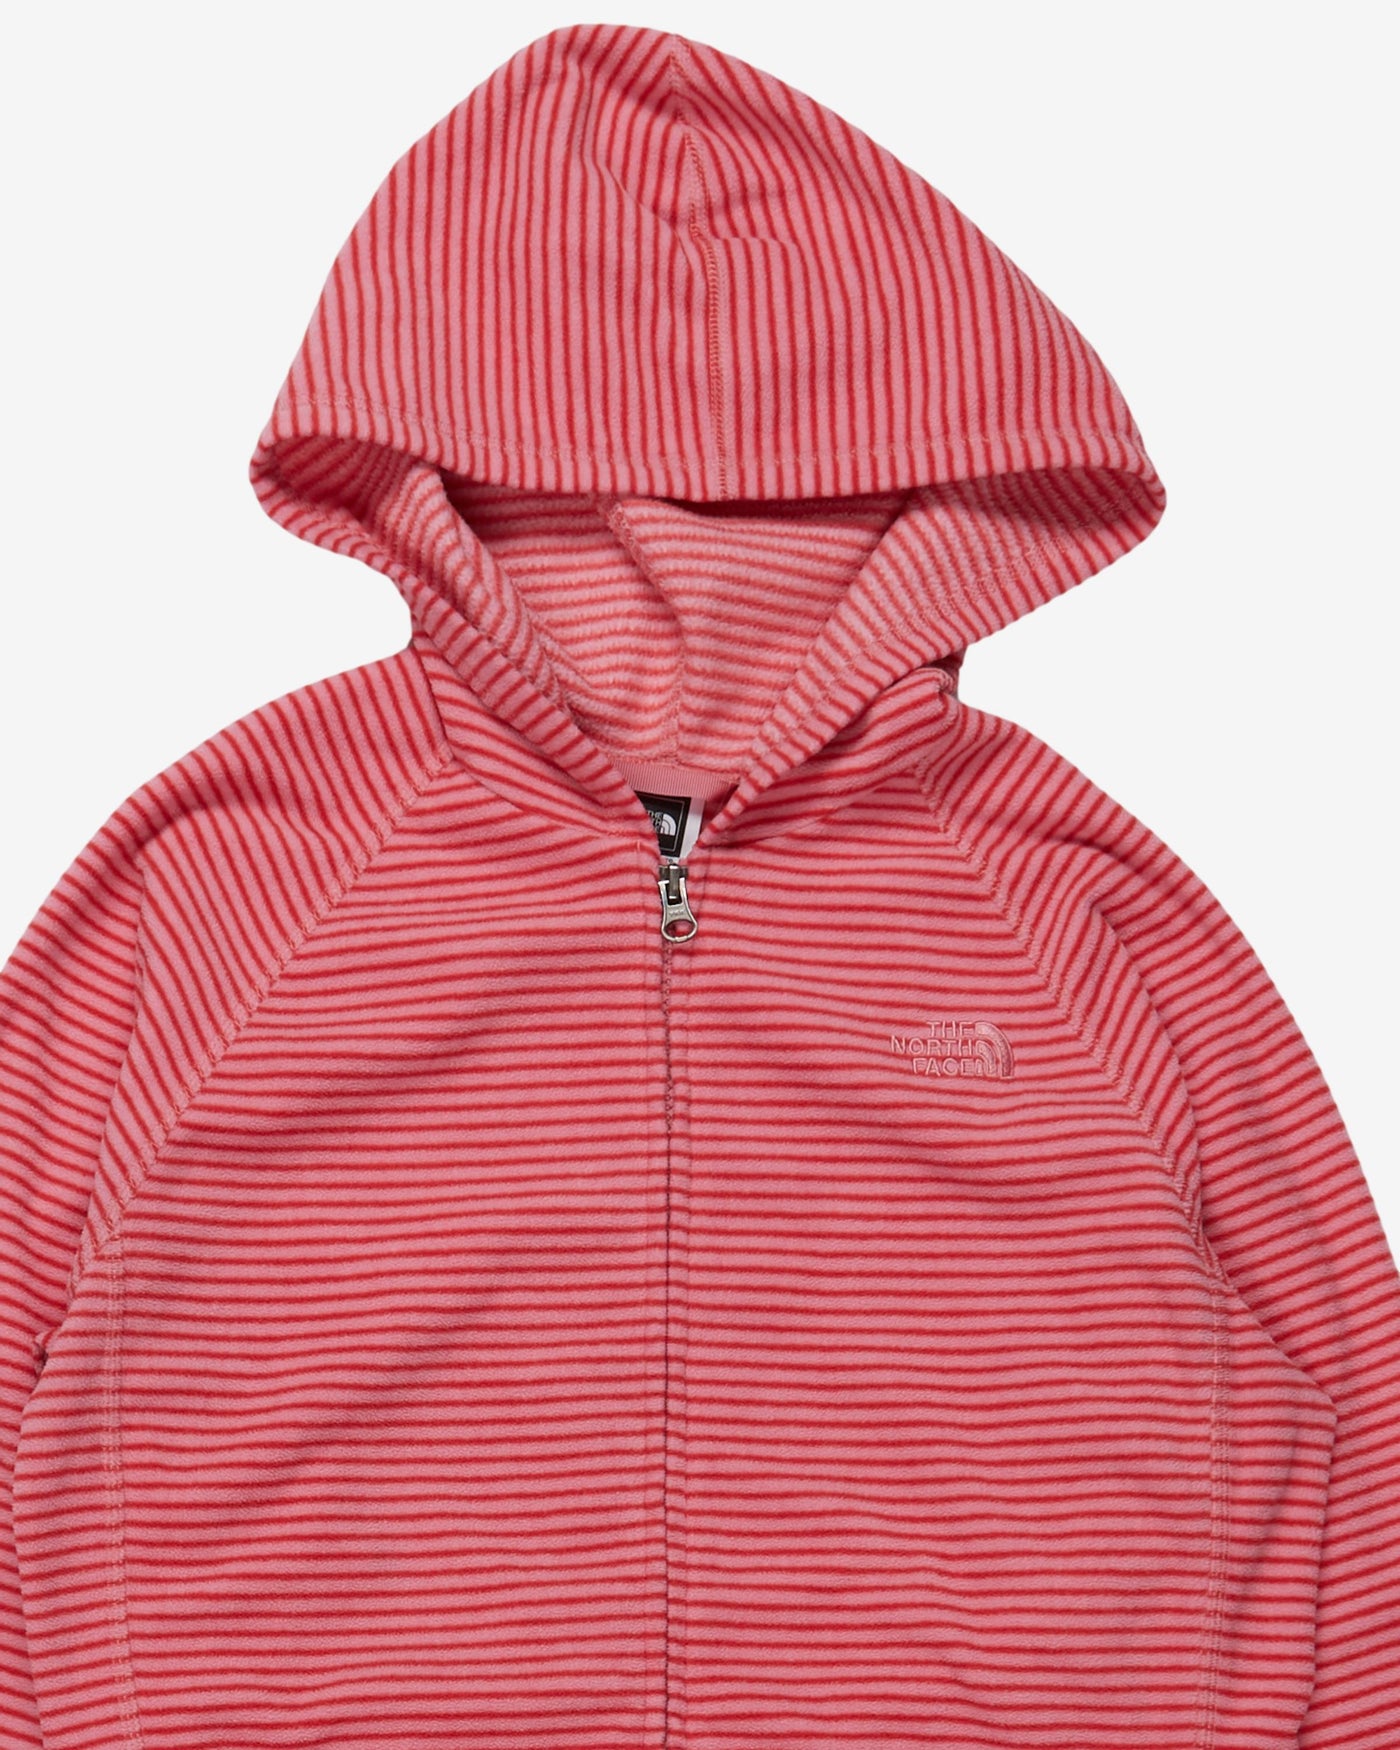 north face red pink striped fleece - Youth XL